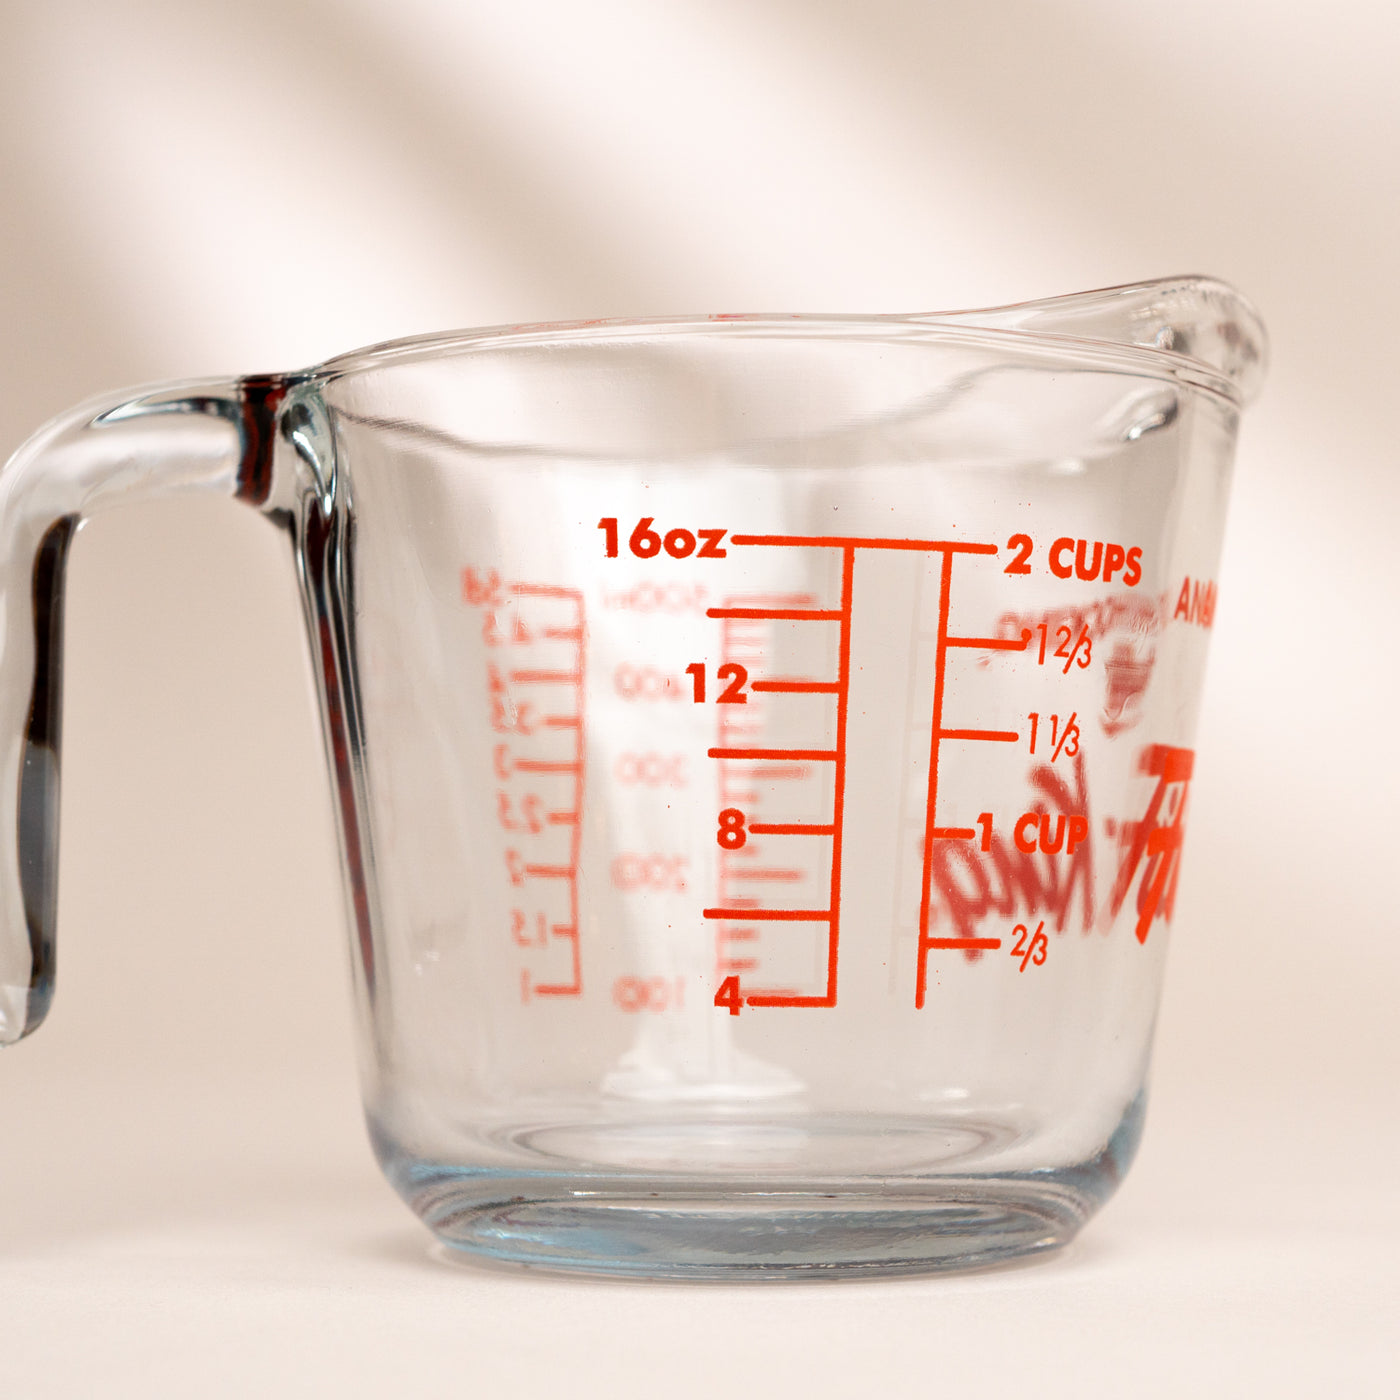 Measuring Cup - 2 Cup